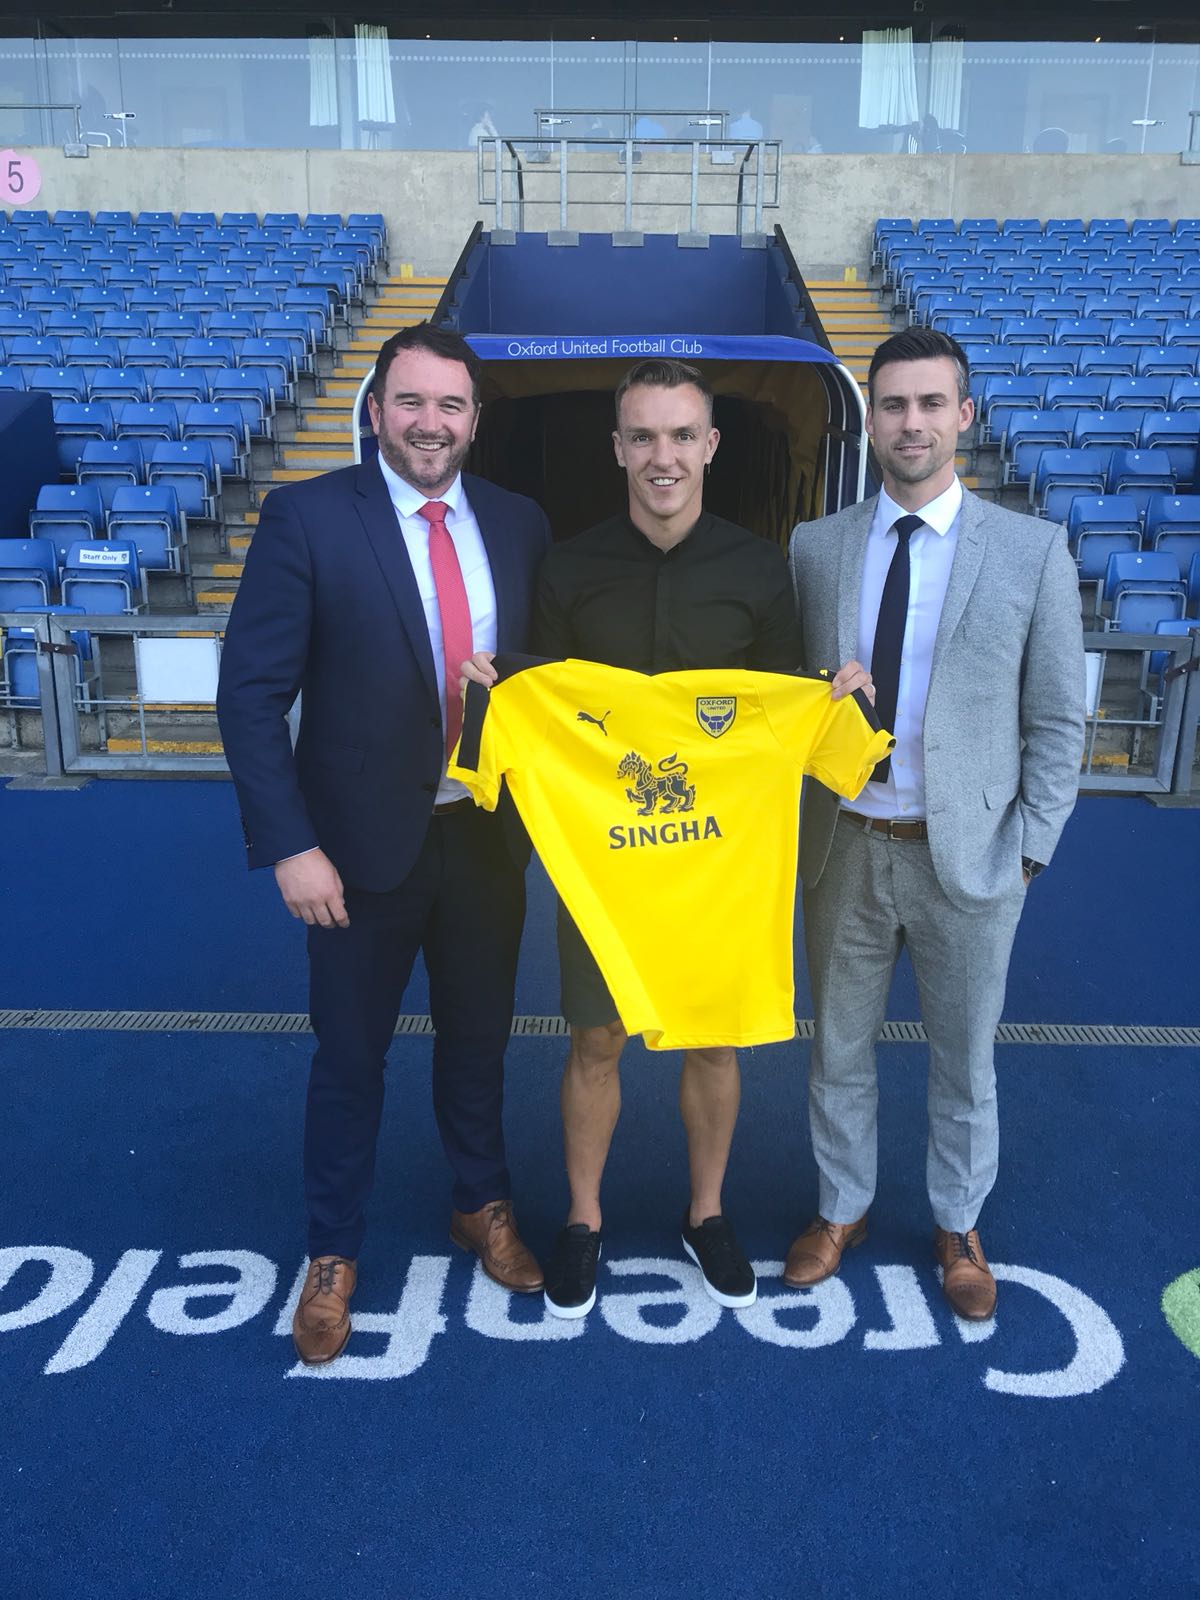 Tony McMahon signs for Oxford